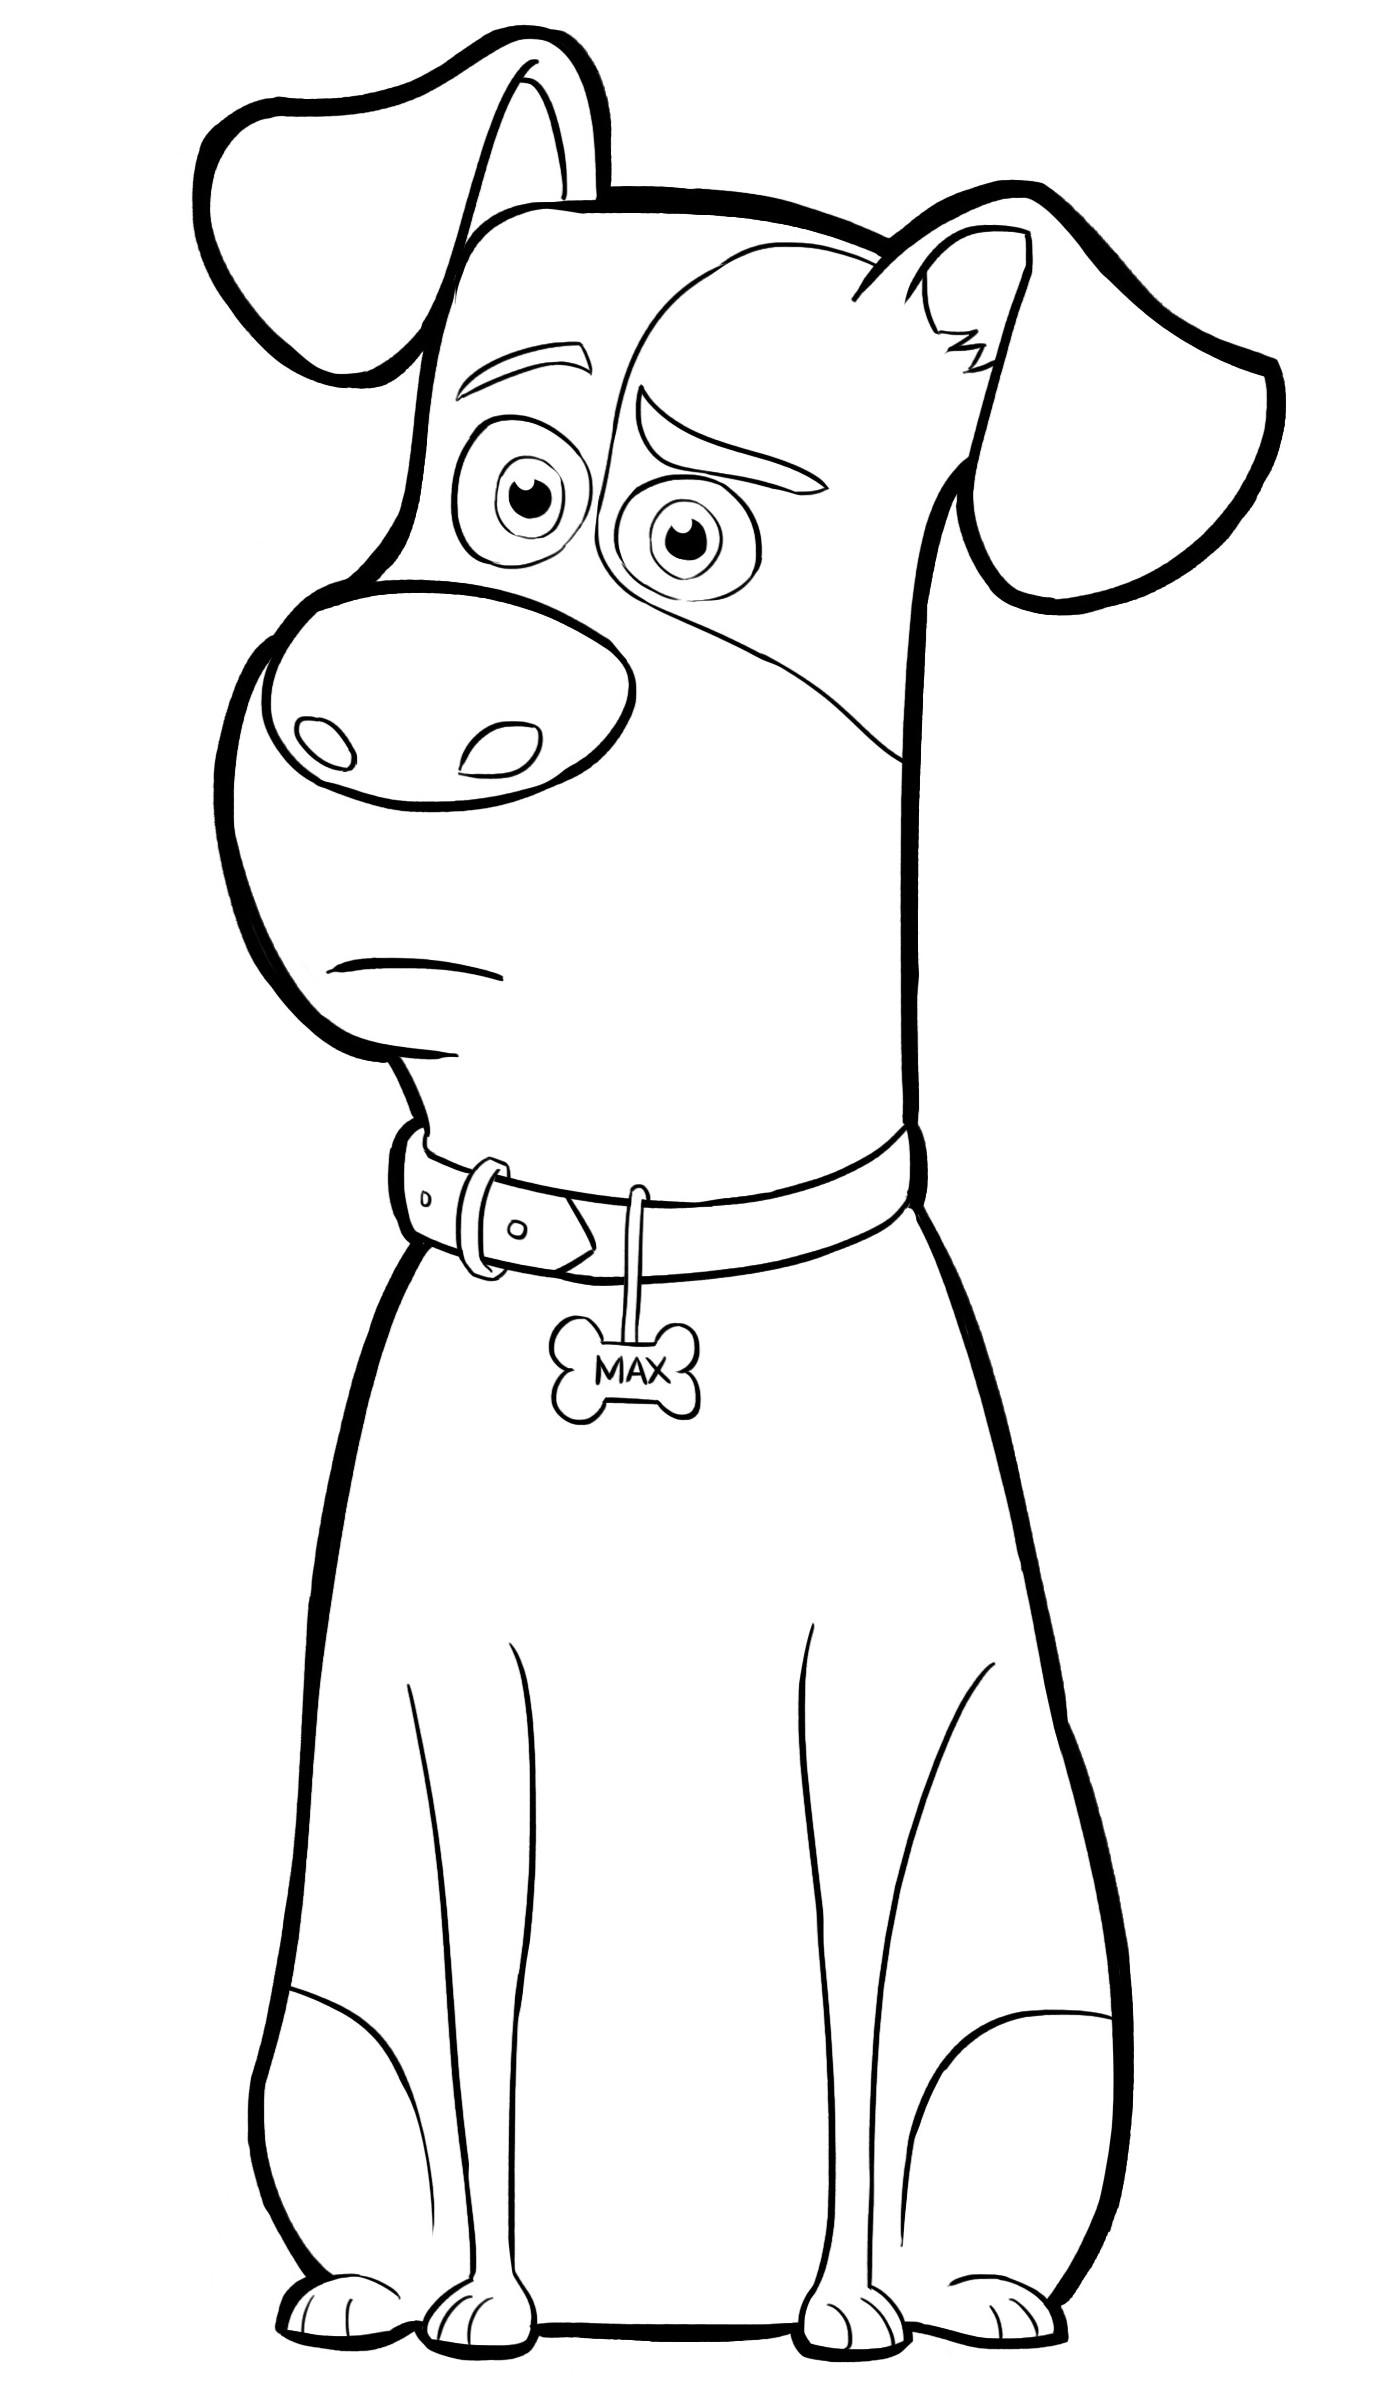 Printable Coloring Book Pages
 Pets Coloring Pages Best Coloring Pages For Kids